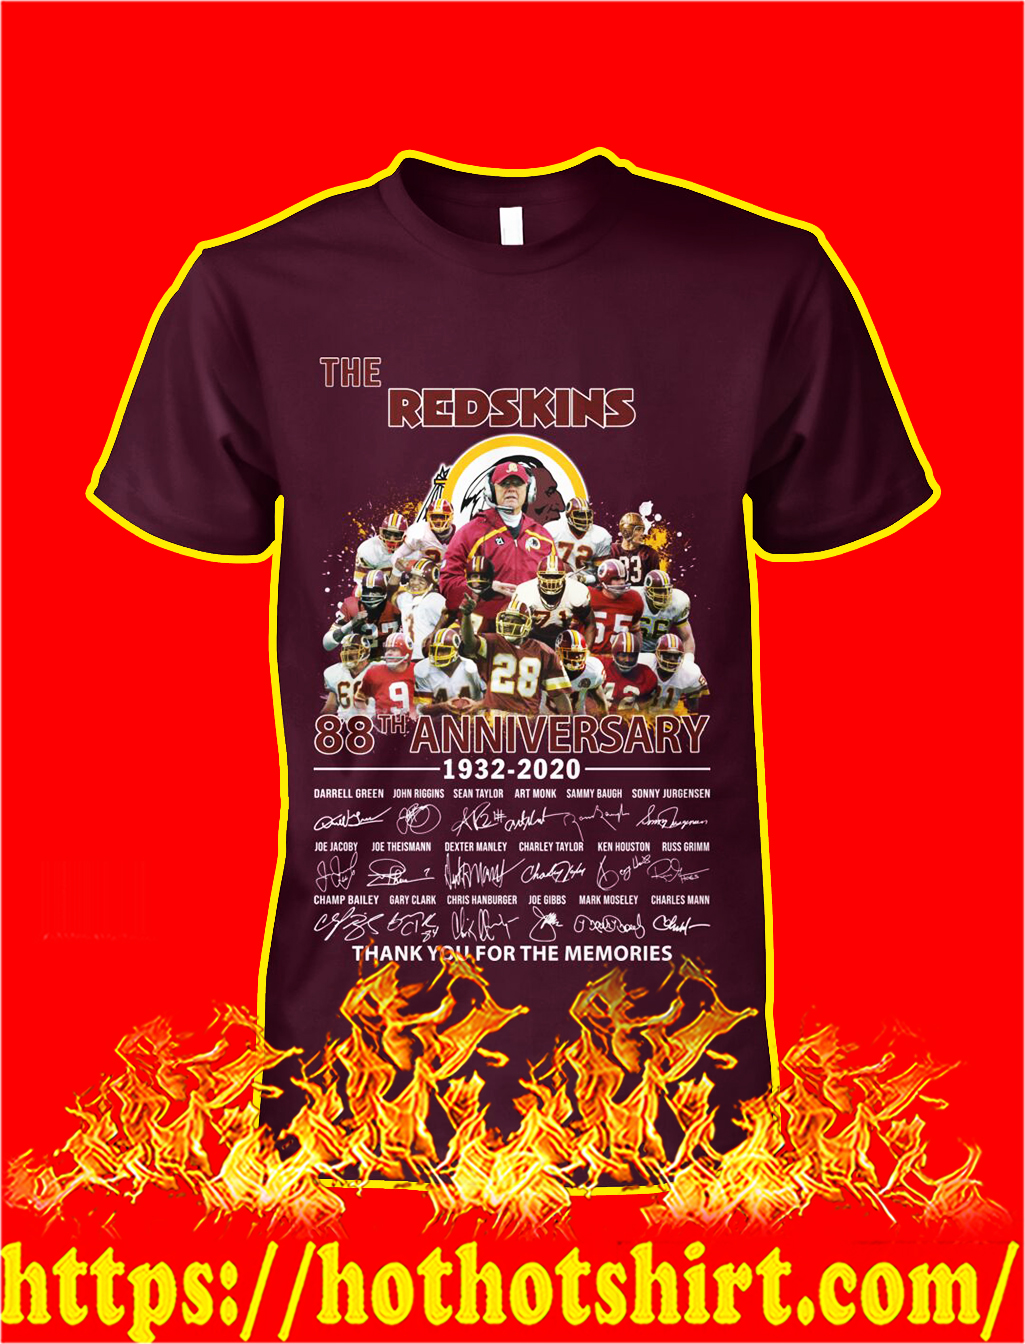 The redskins 88th anniversary thank you for the memories shirt and sweatshirt